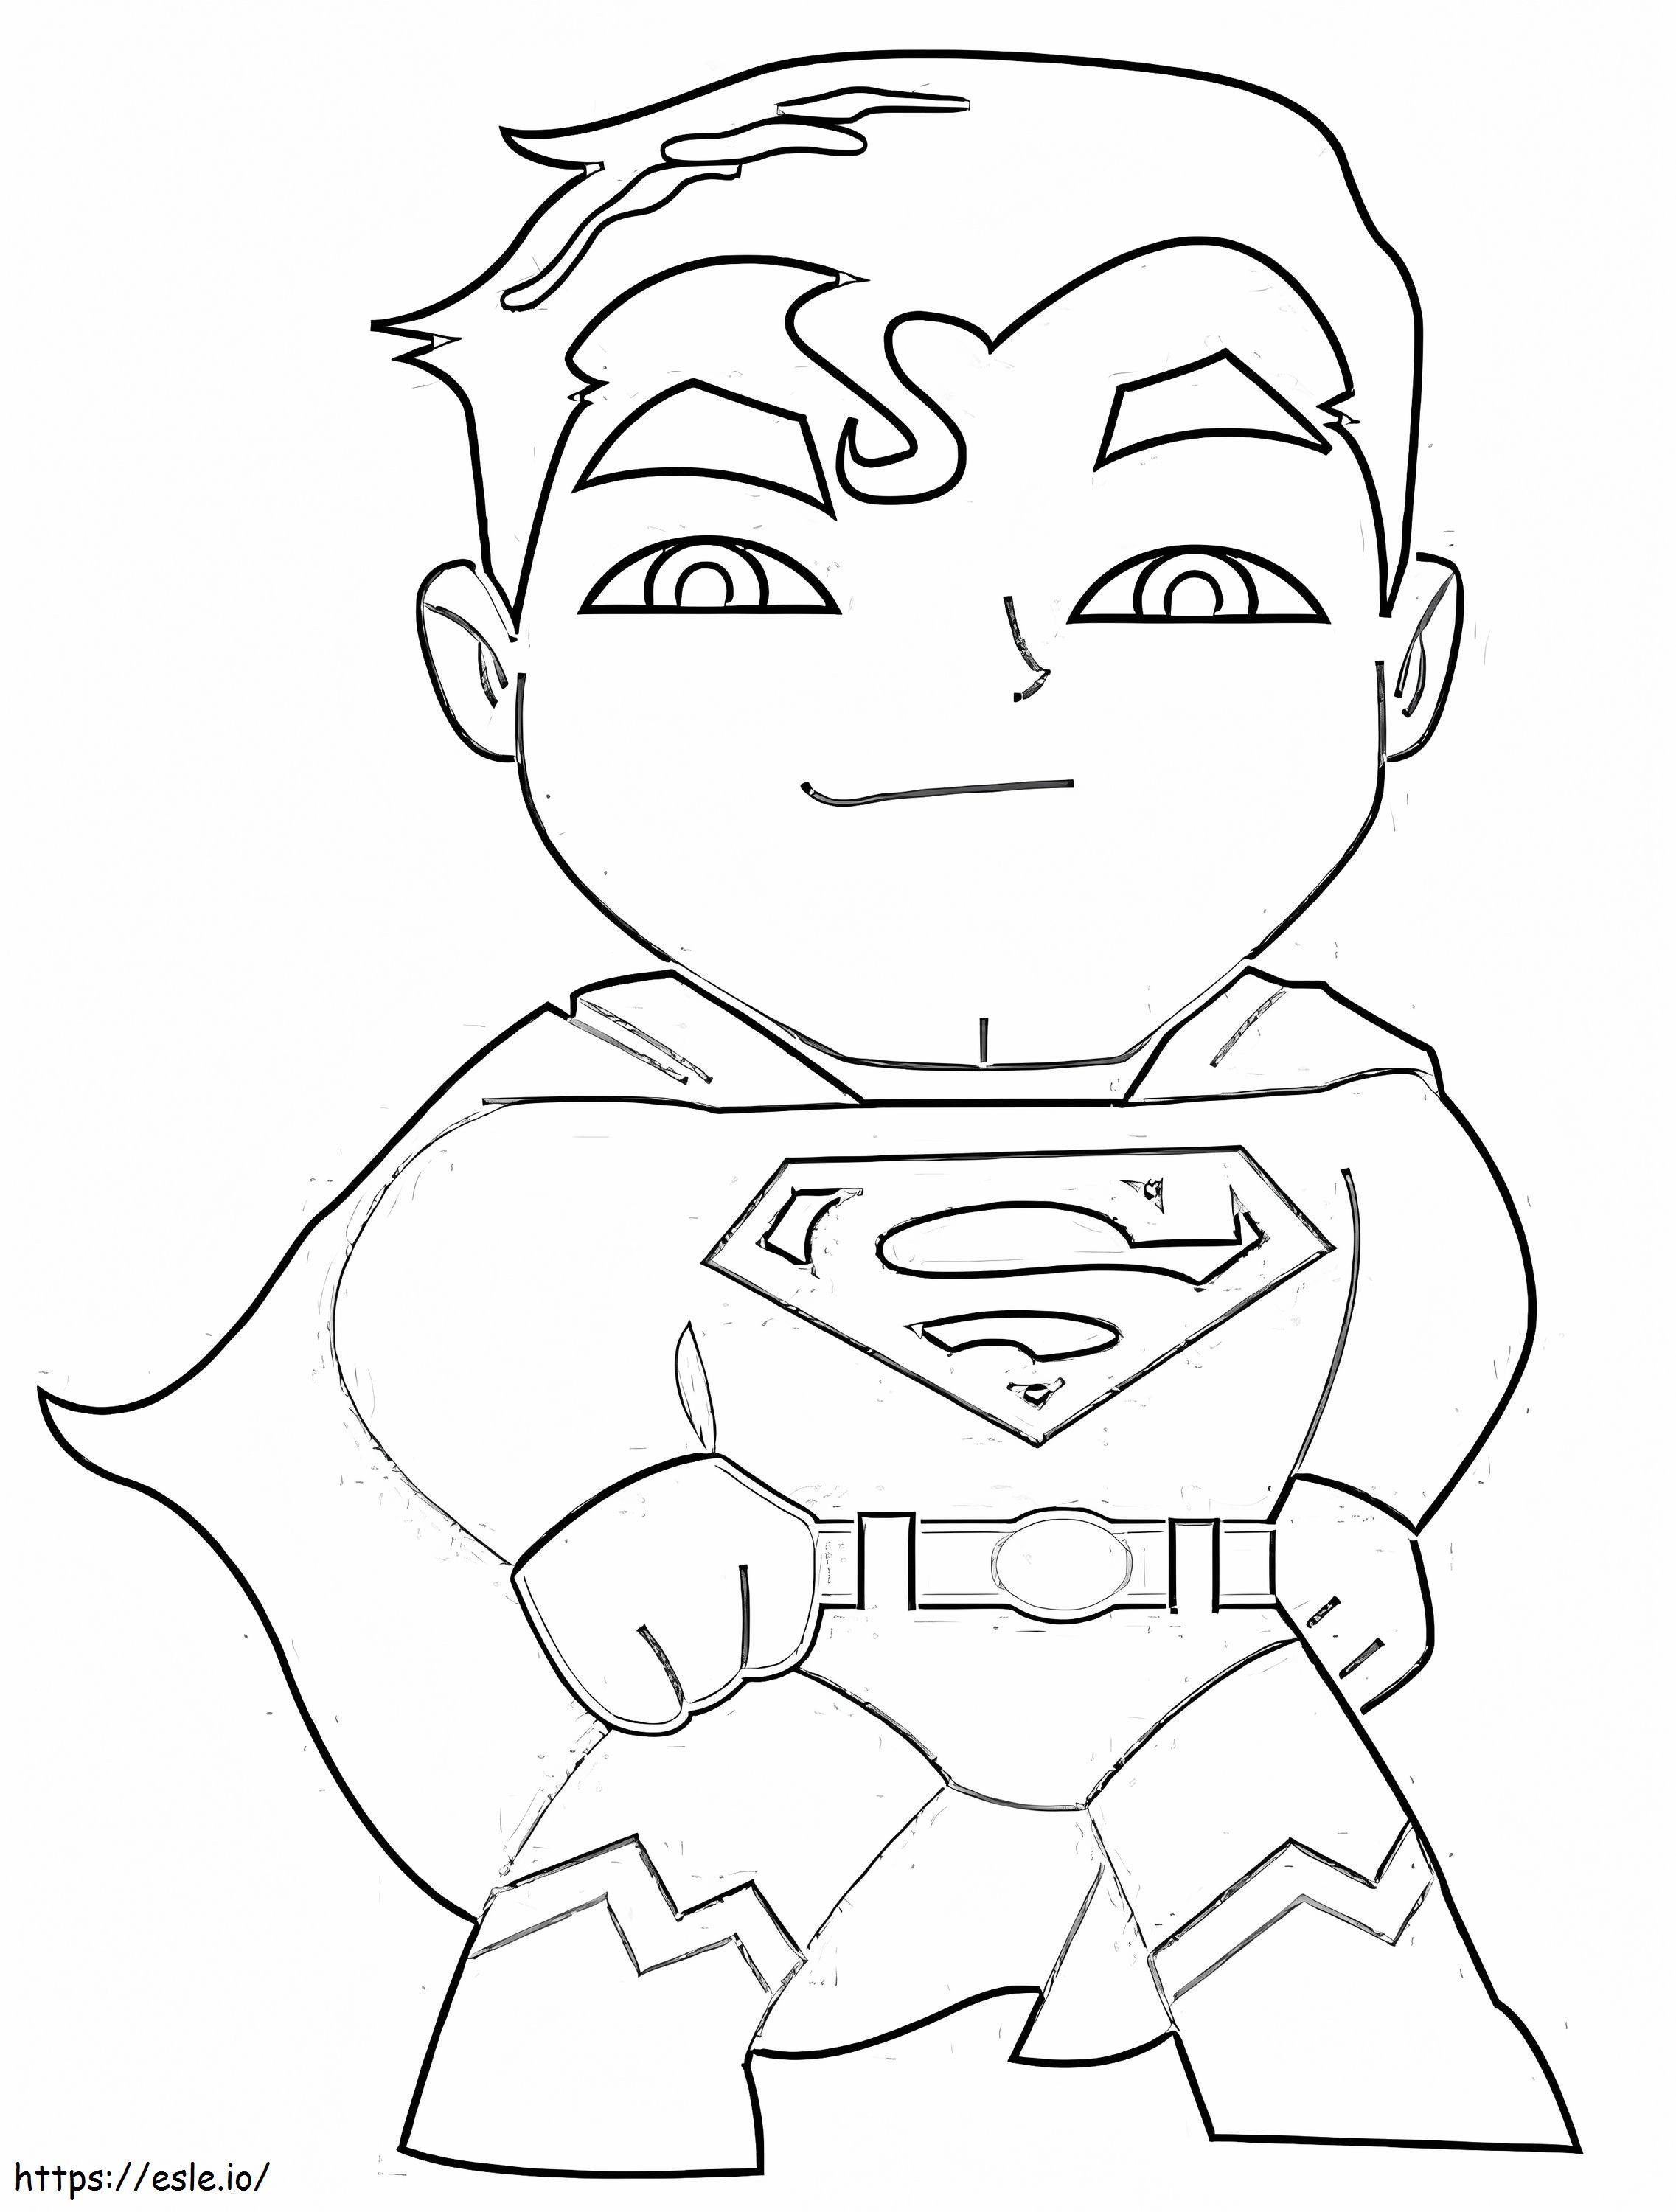 Little Superman coloring page